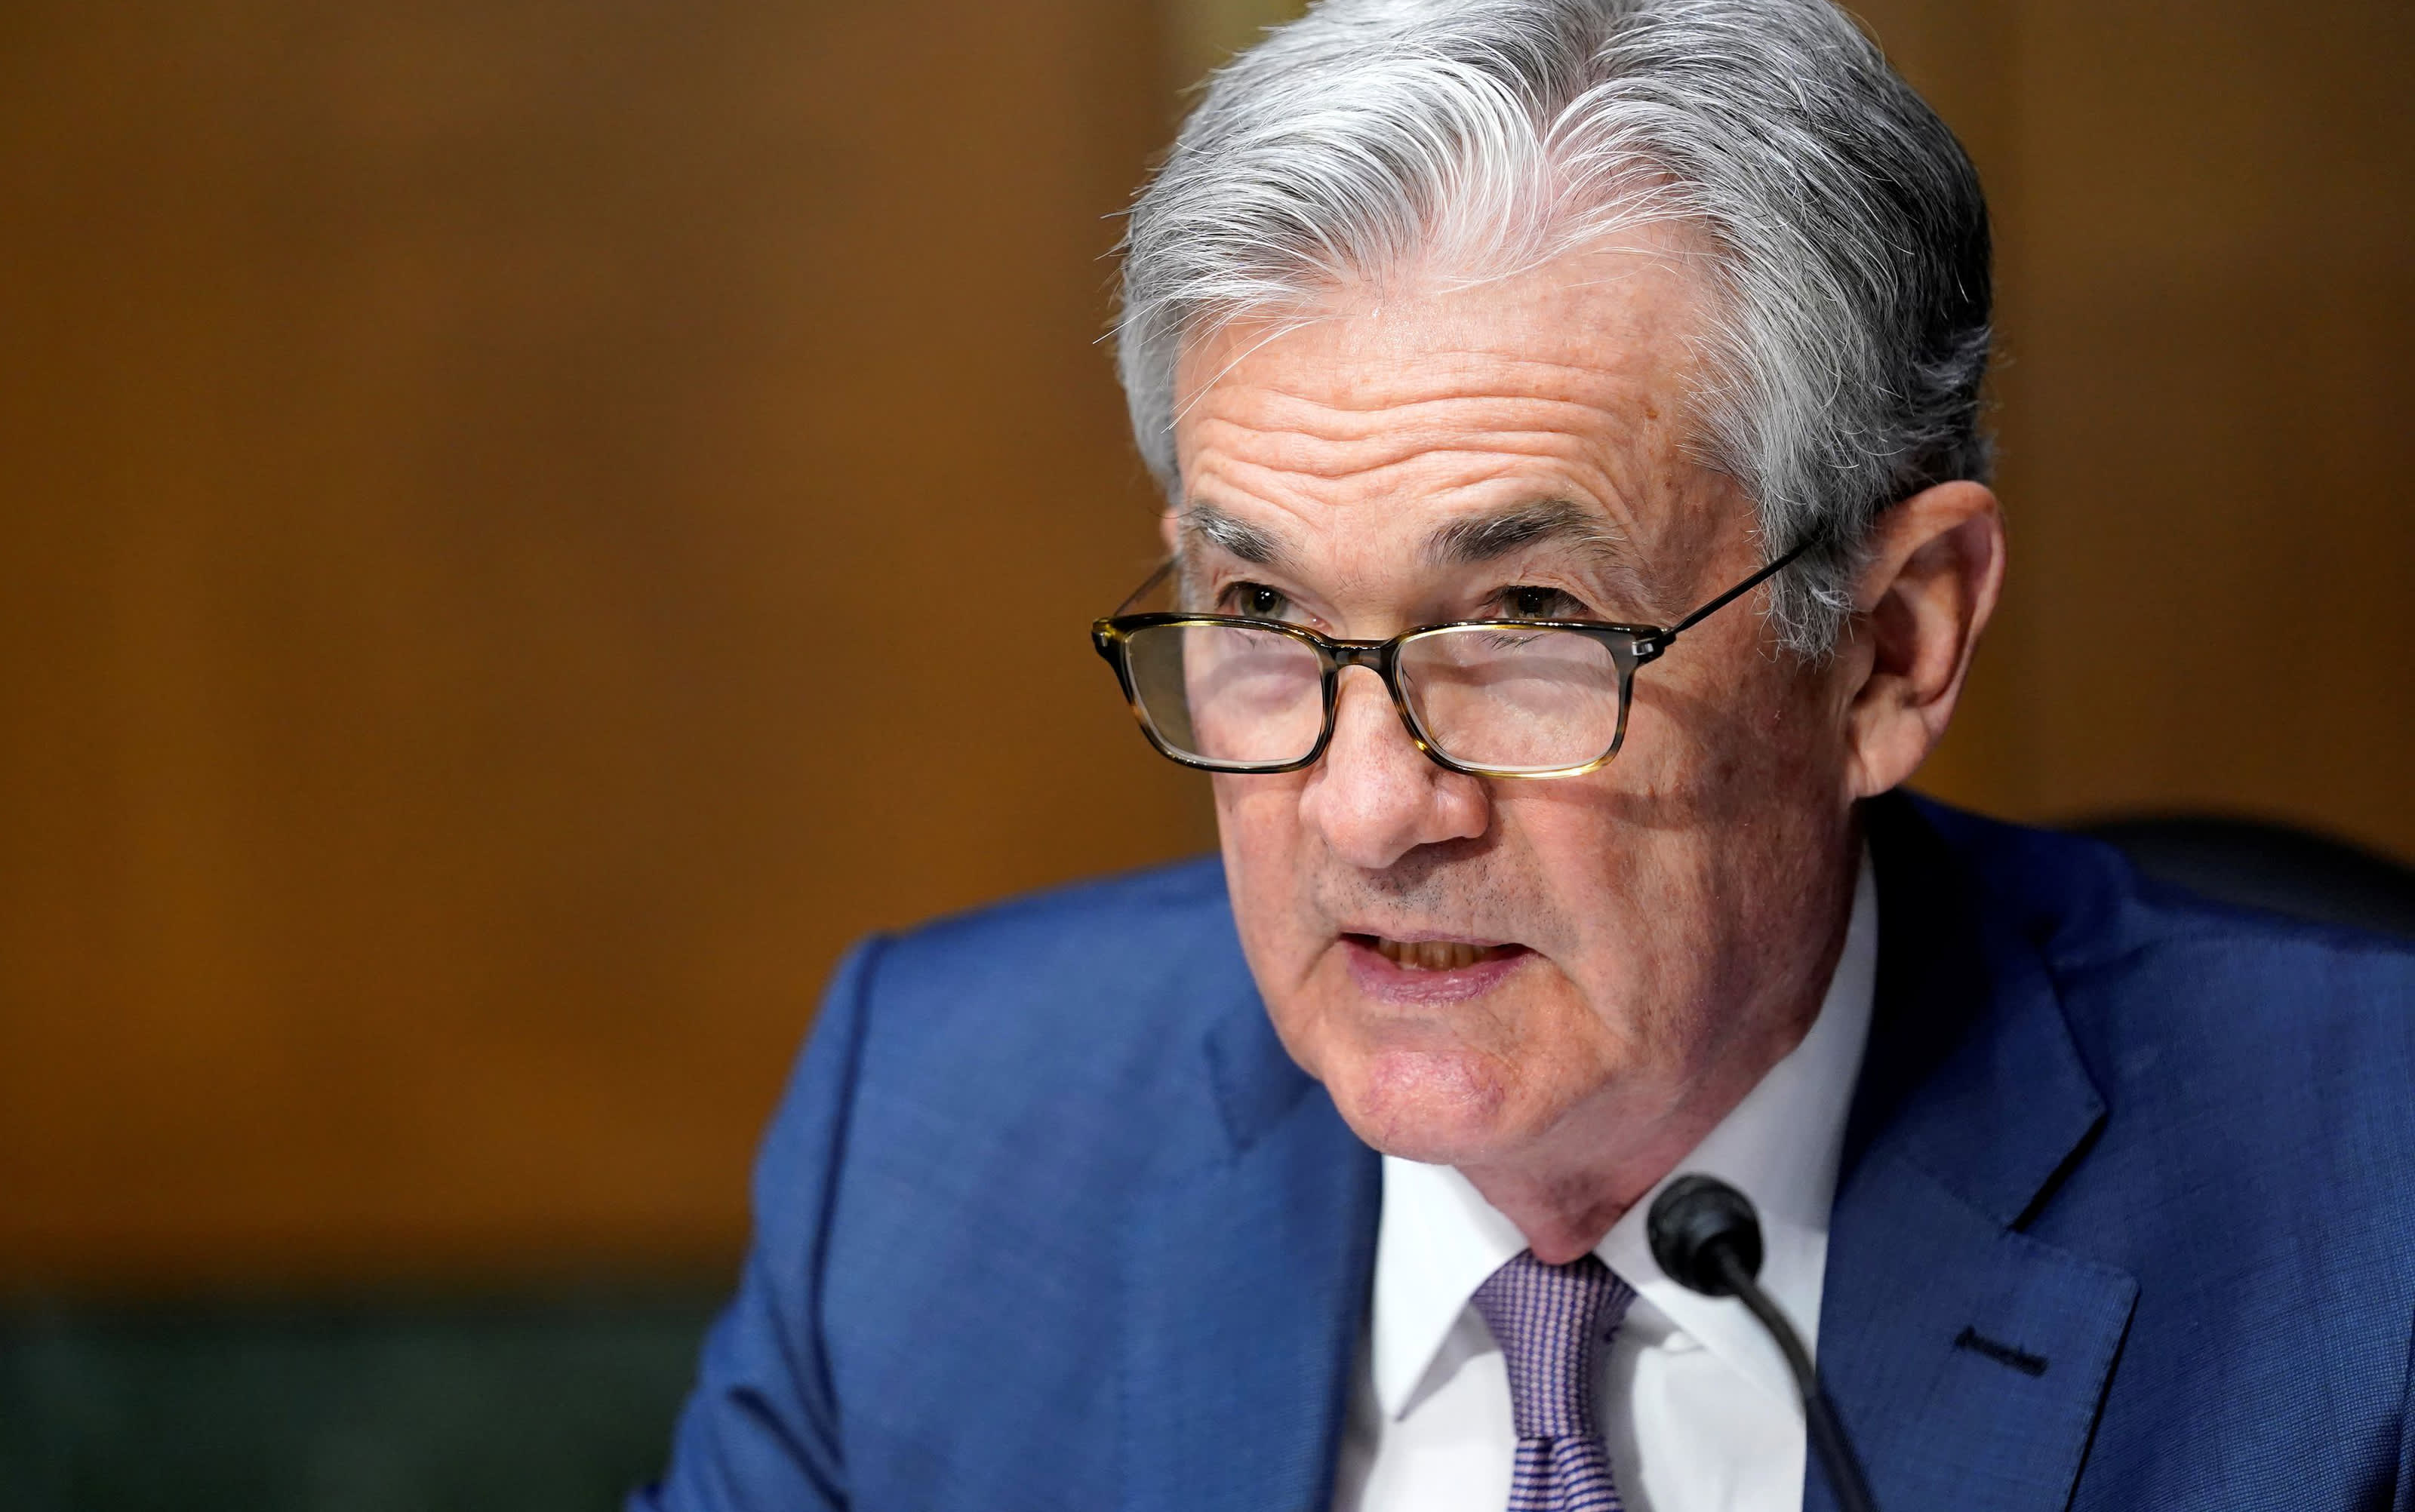 Fed Chairman Powell testifies before the House Committee